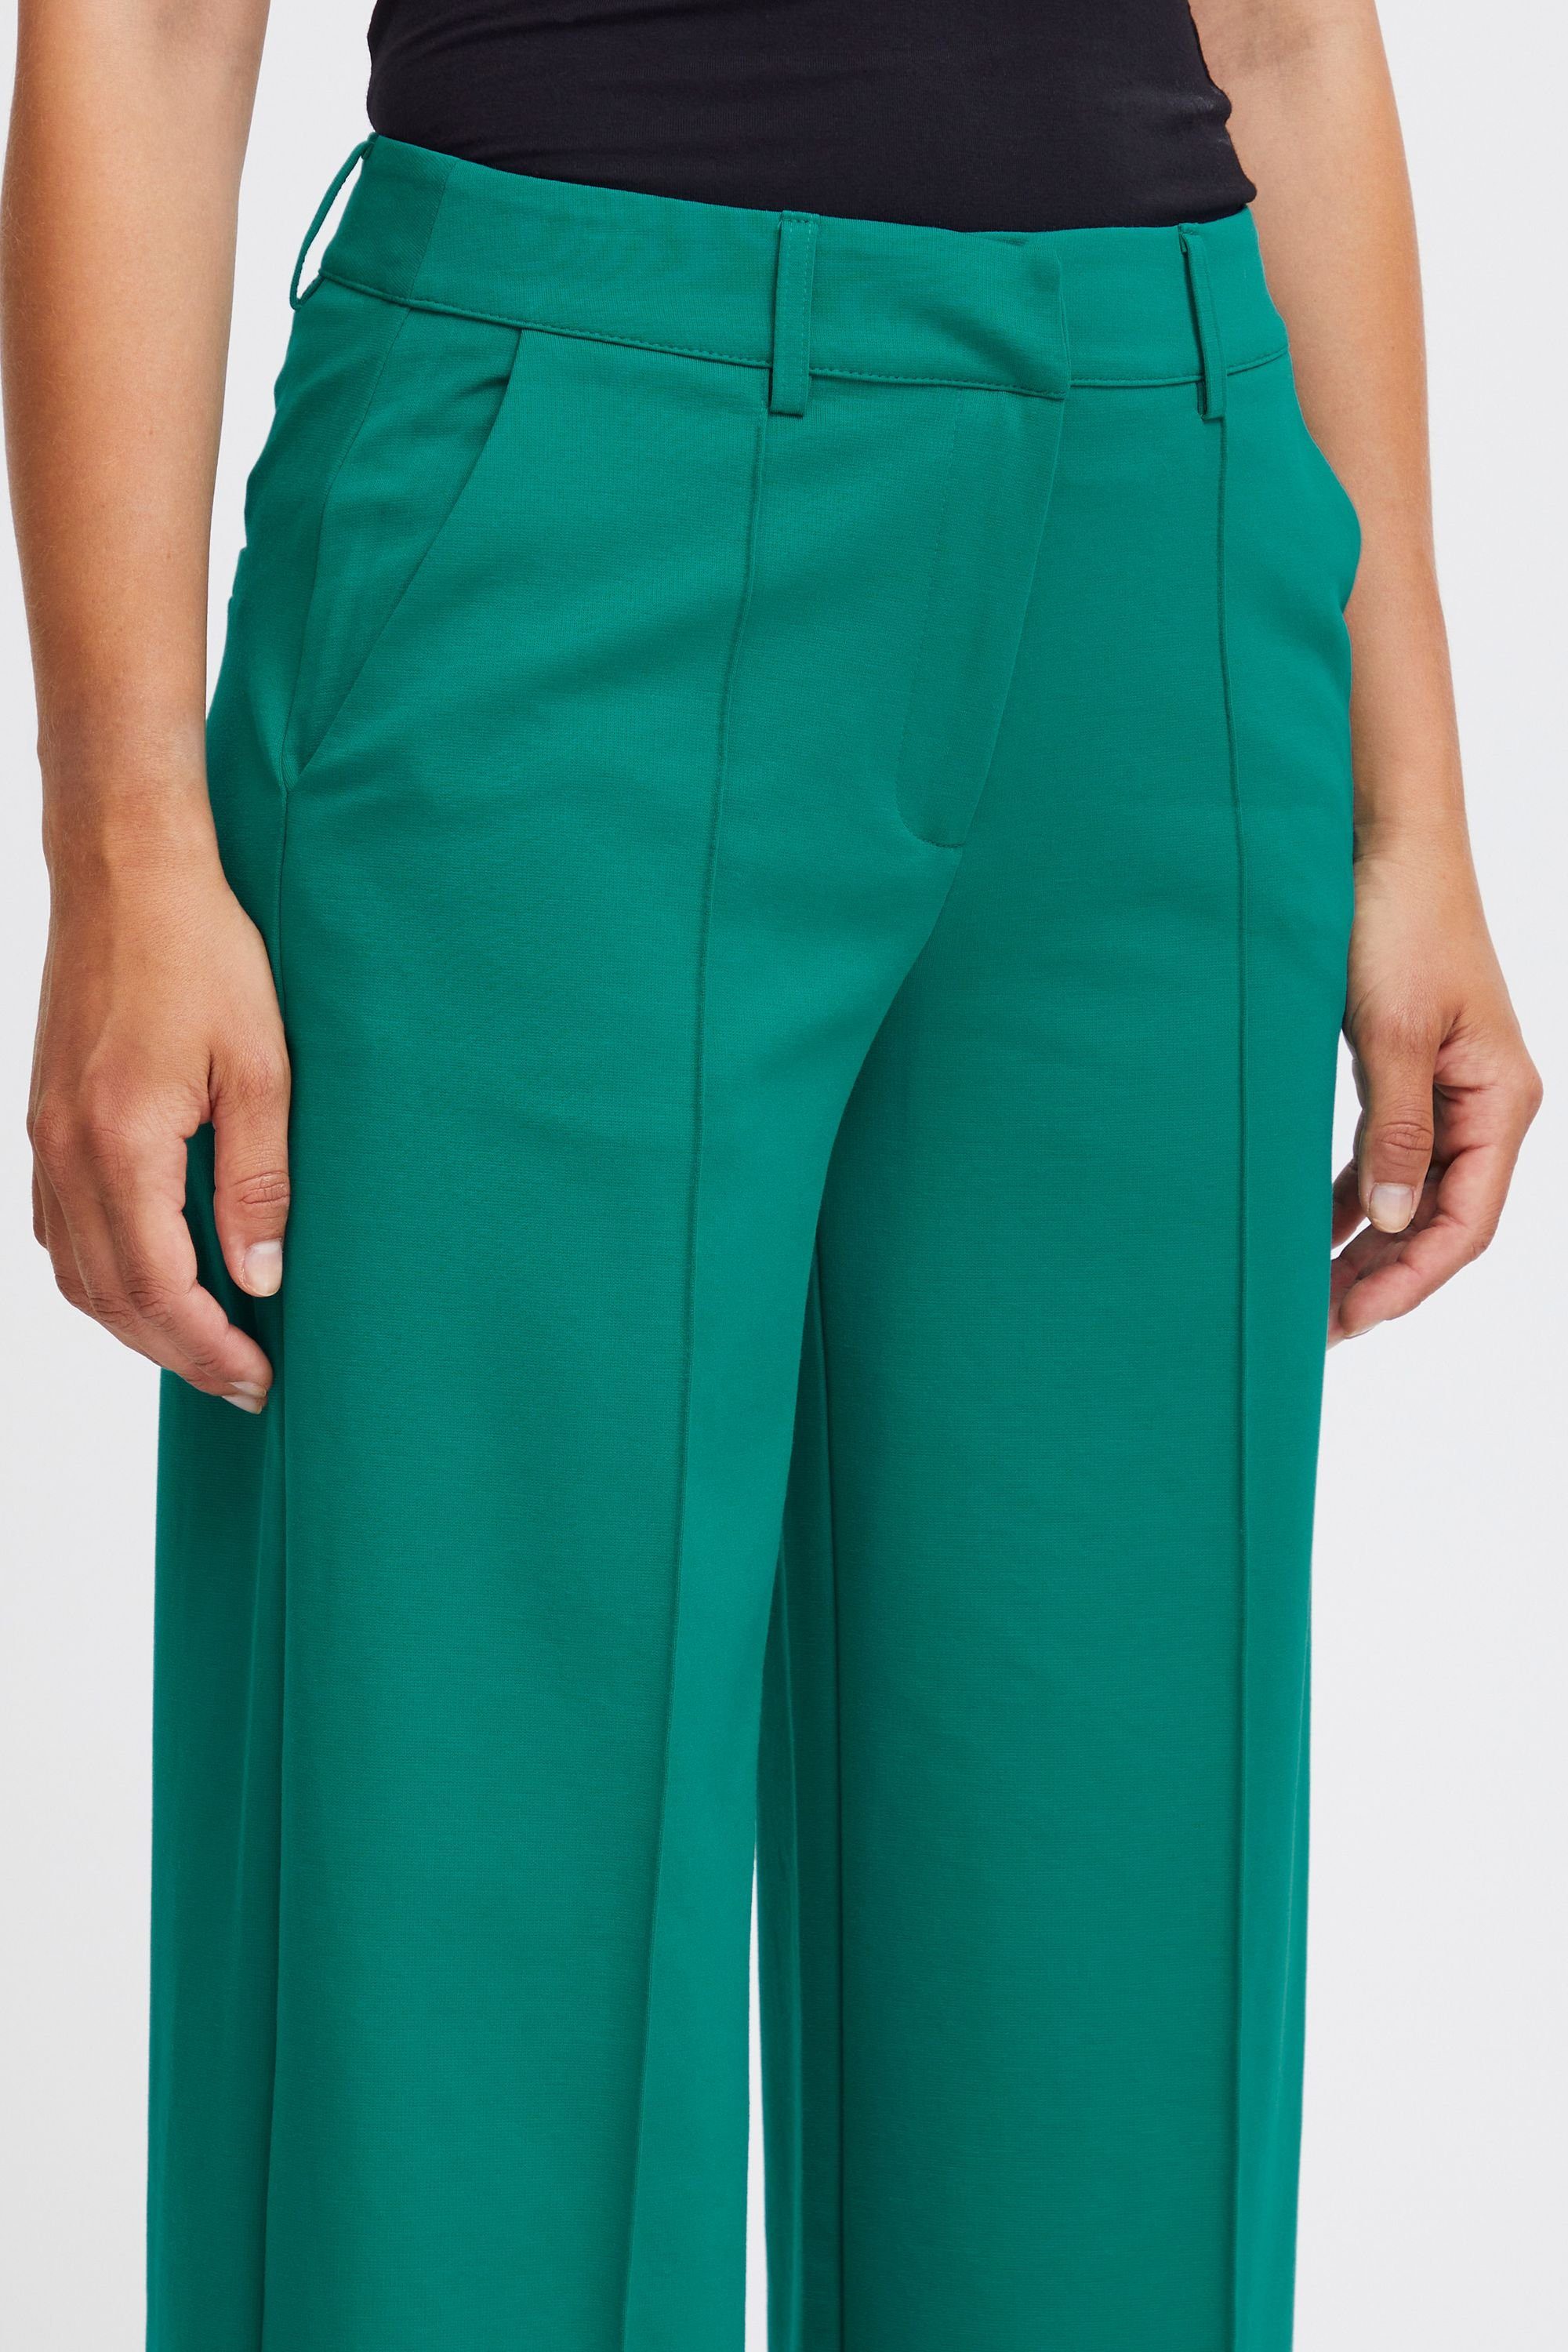 Stoffhose Ichi IHKATE OFFICE PA 20116768 WIDE (185025) Quetzal Green SUS